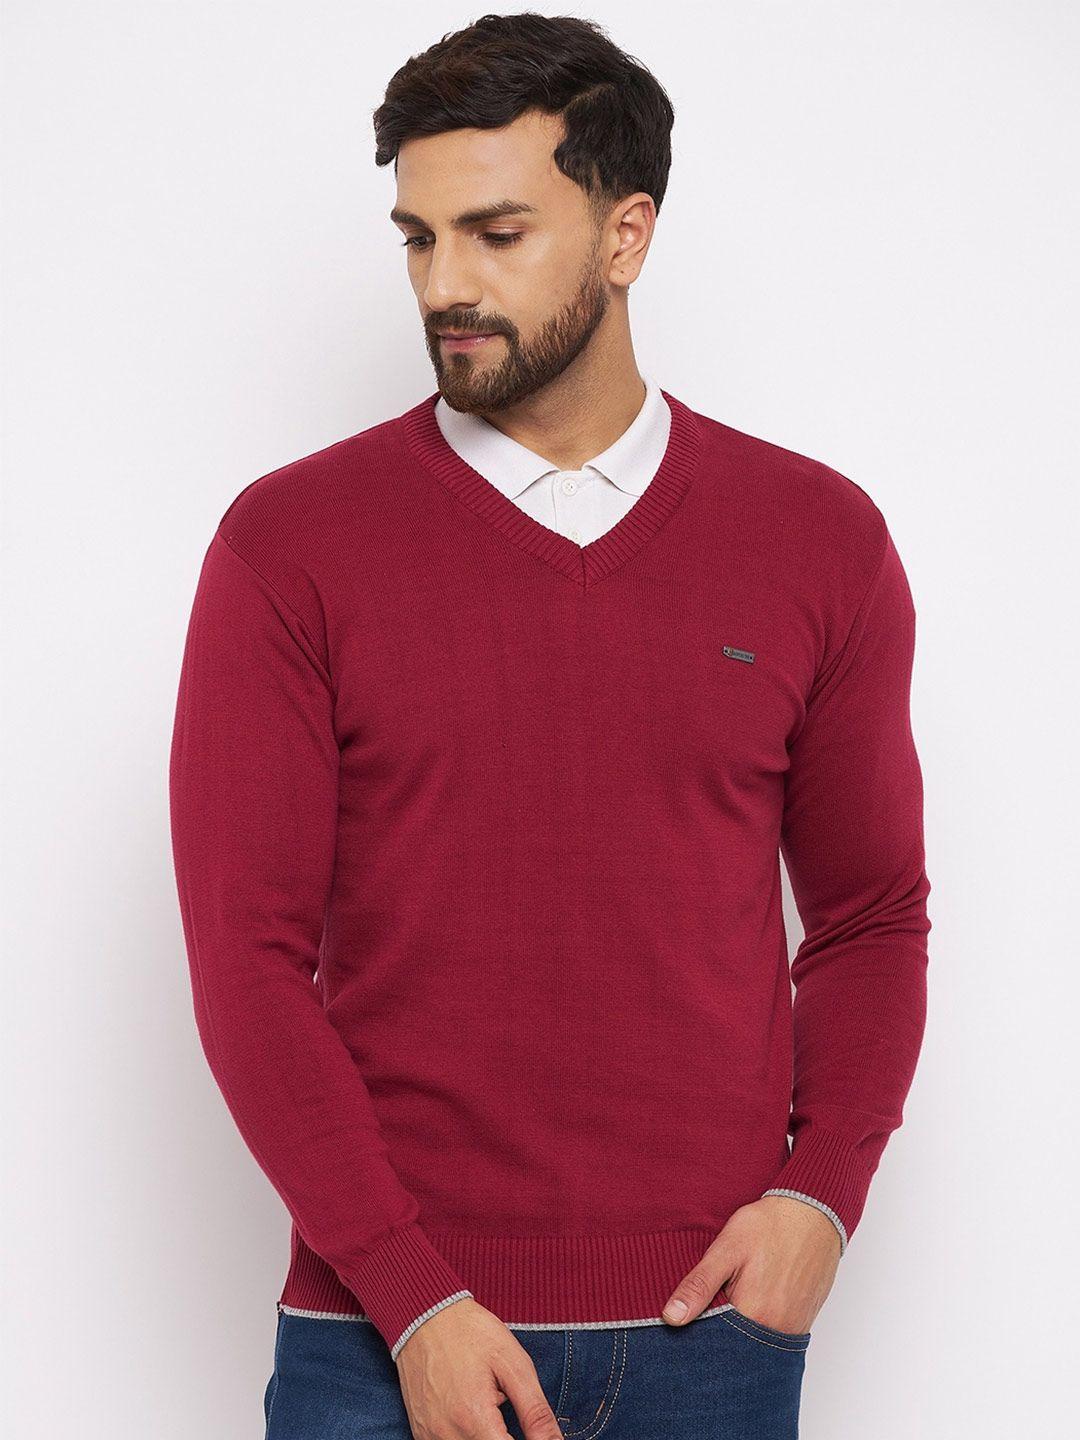 duke-men-red-solid-acrylic-pullover